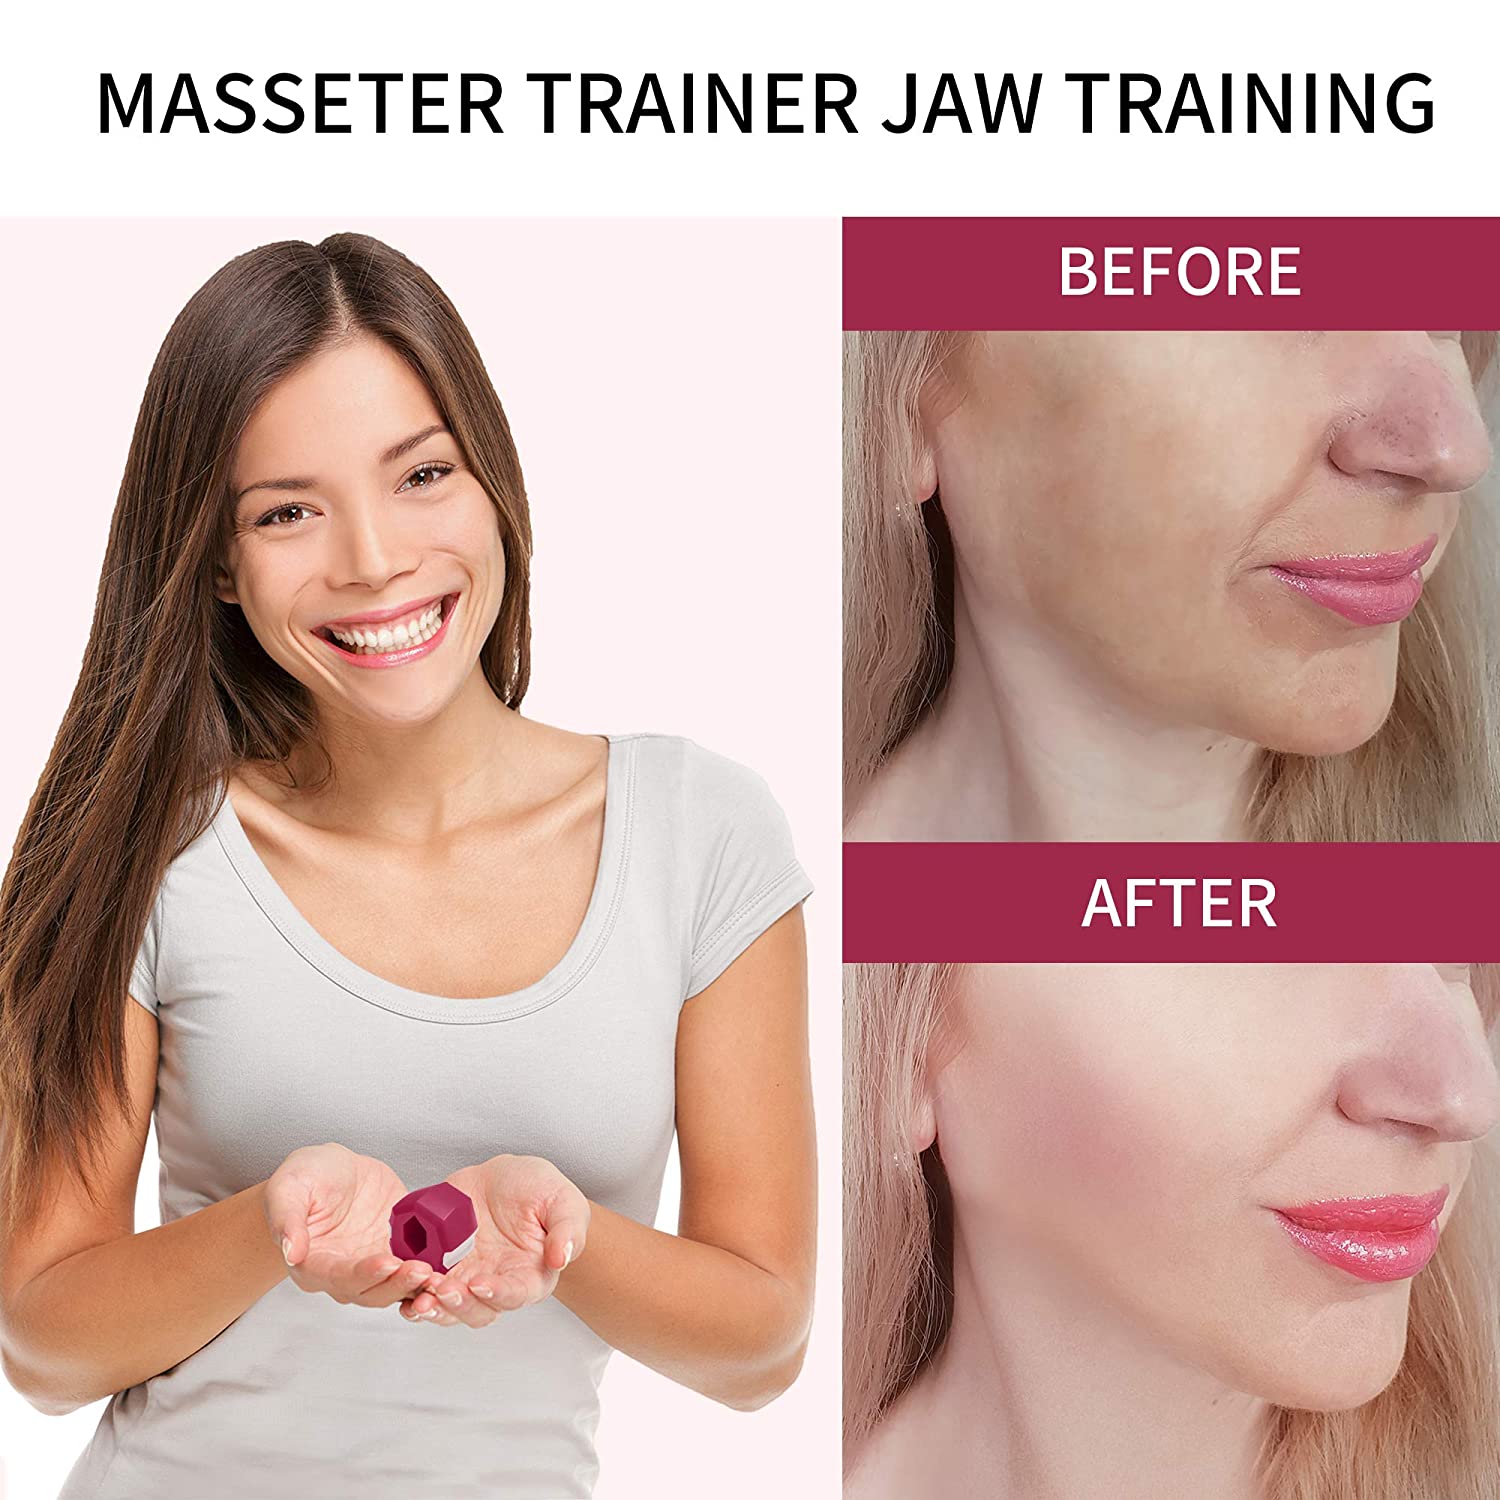 KBLLNPBP Jaw Line Exerciser Facial and Neck Toner Equipment Level 1 2 3 Jaw Trainer Face Fitness Ball & Neck Face Double Menton Exerciser Ball Jaw Exerciser Chew Jawline 